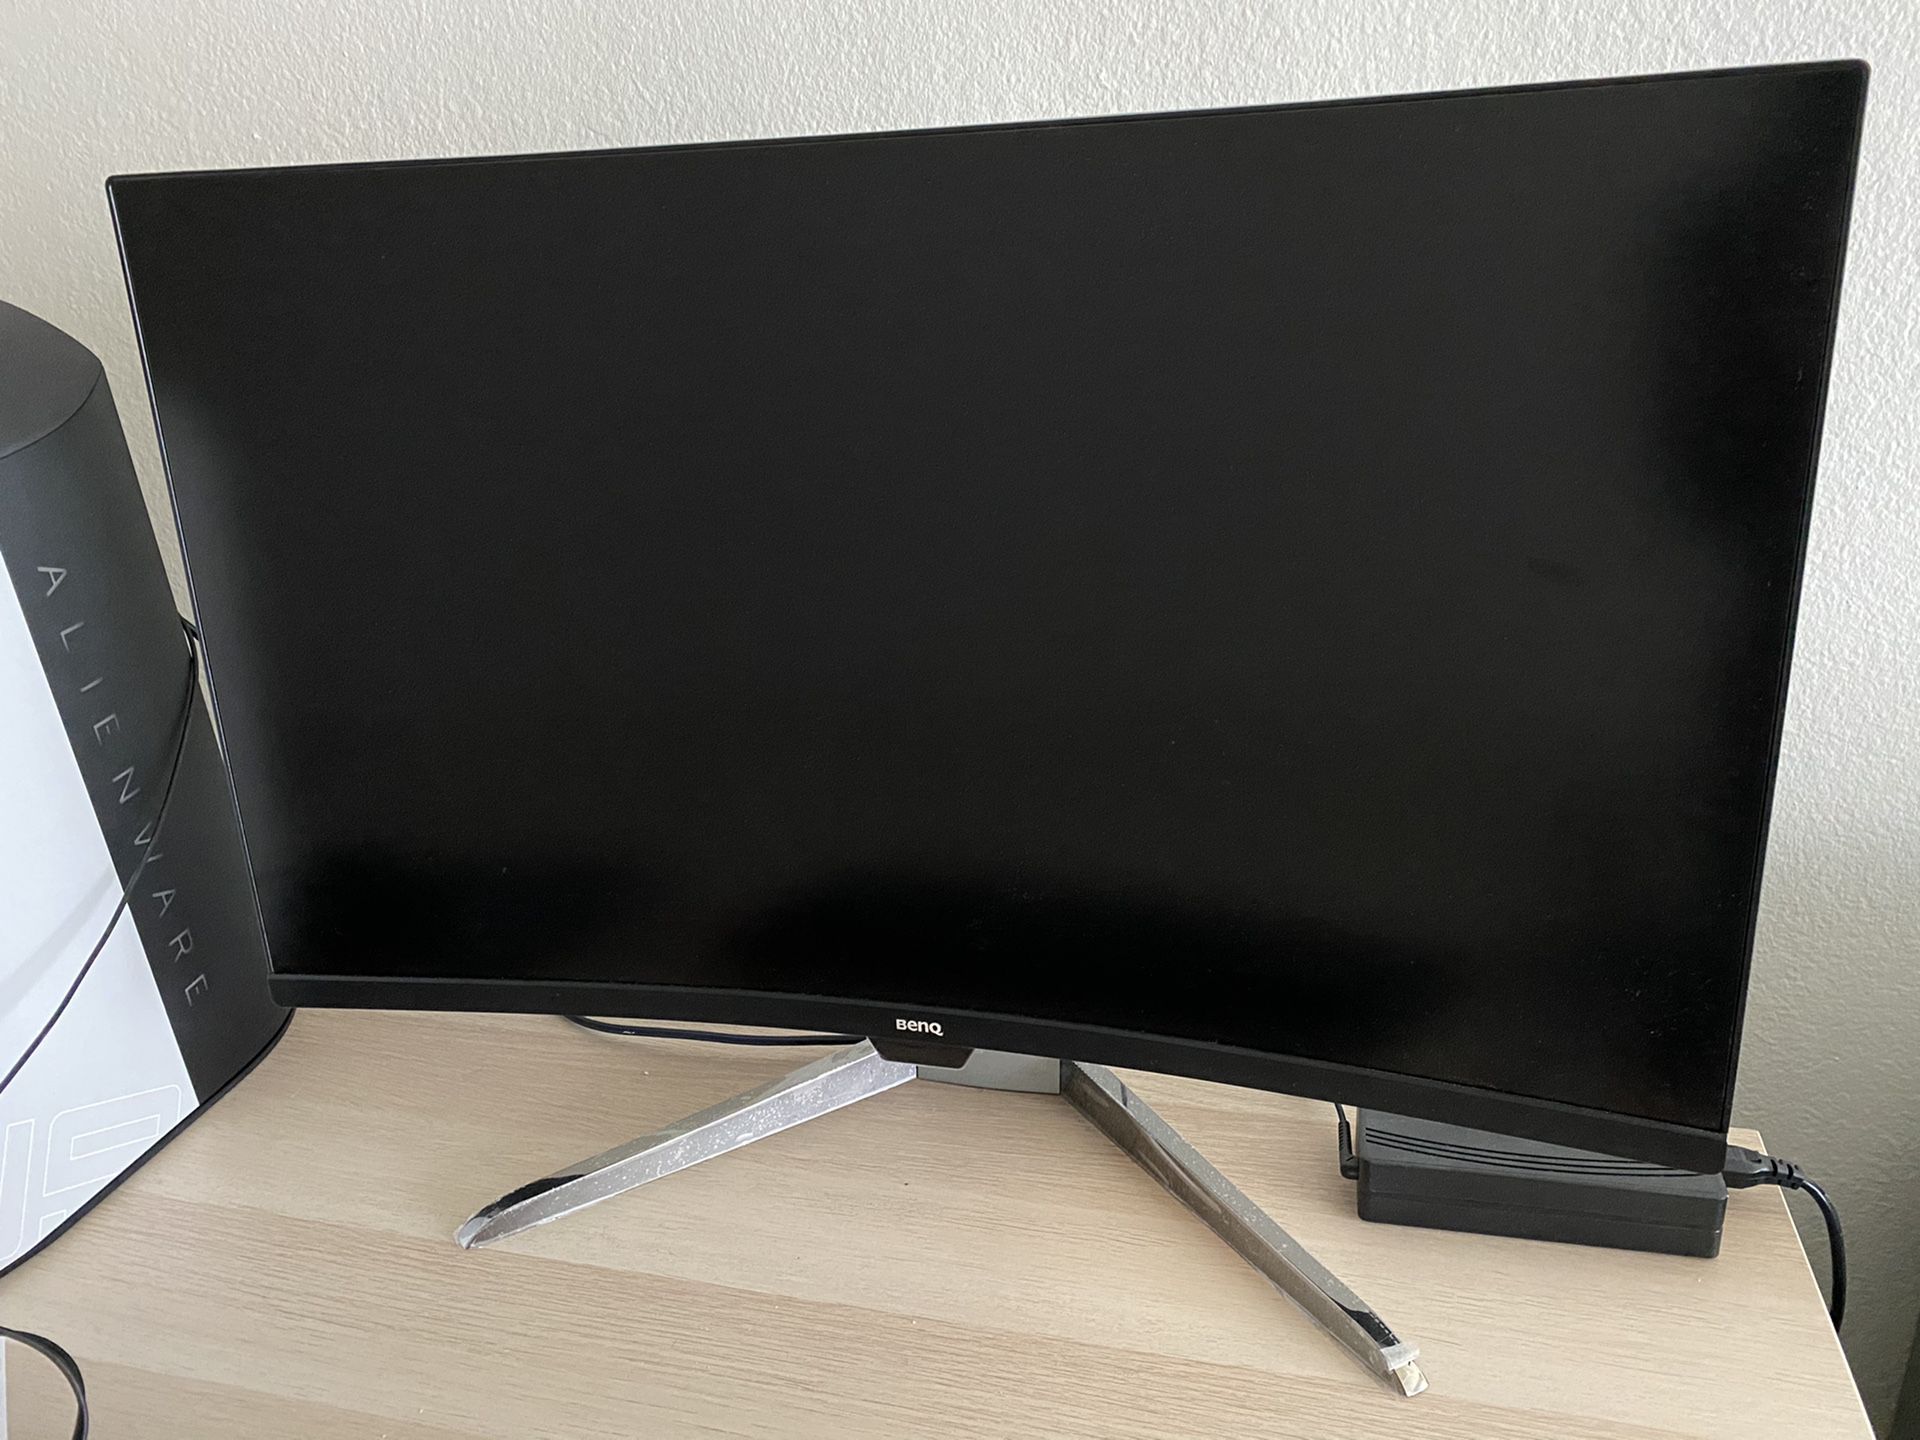 BENQ CURVED COMPUTER MONITOR FOR GAMING